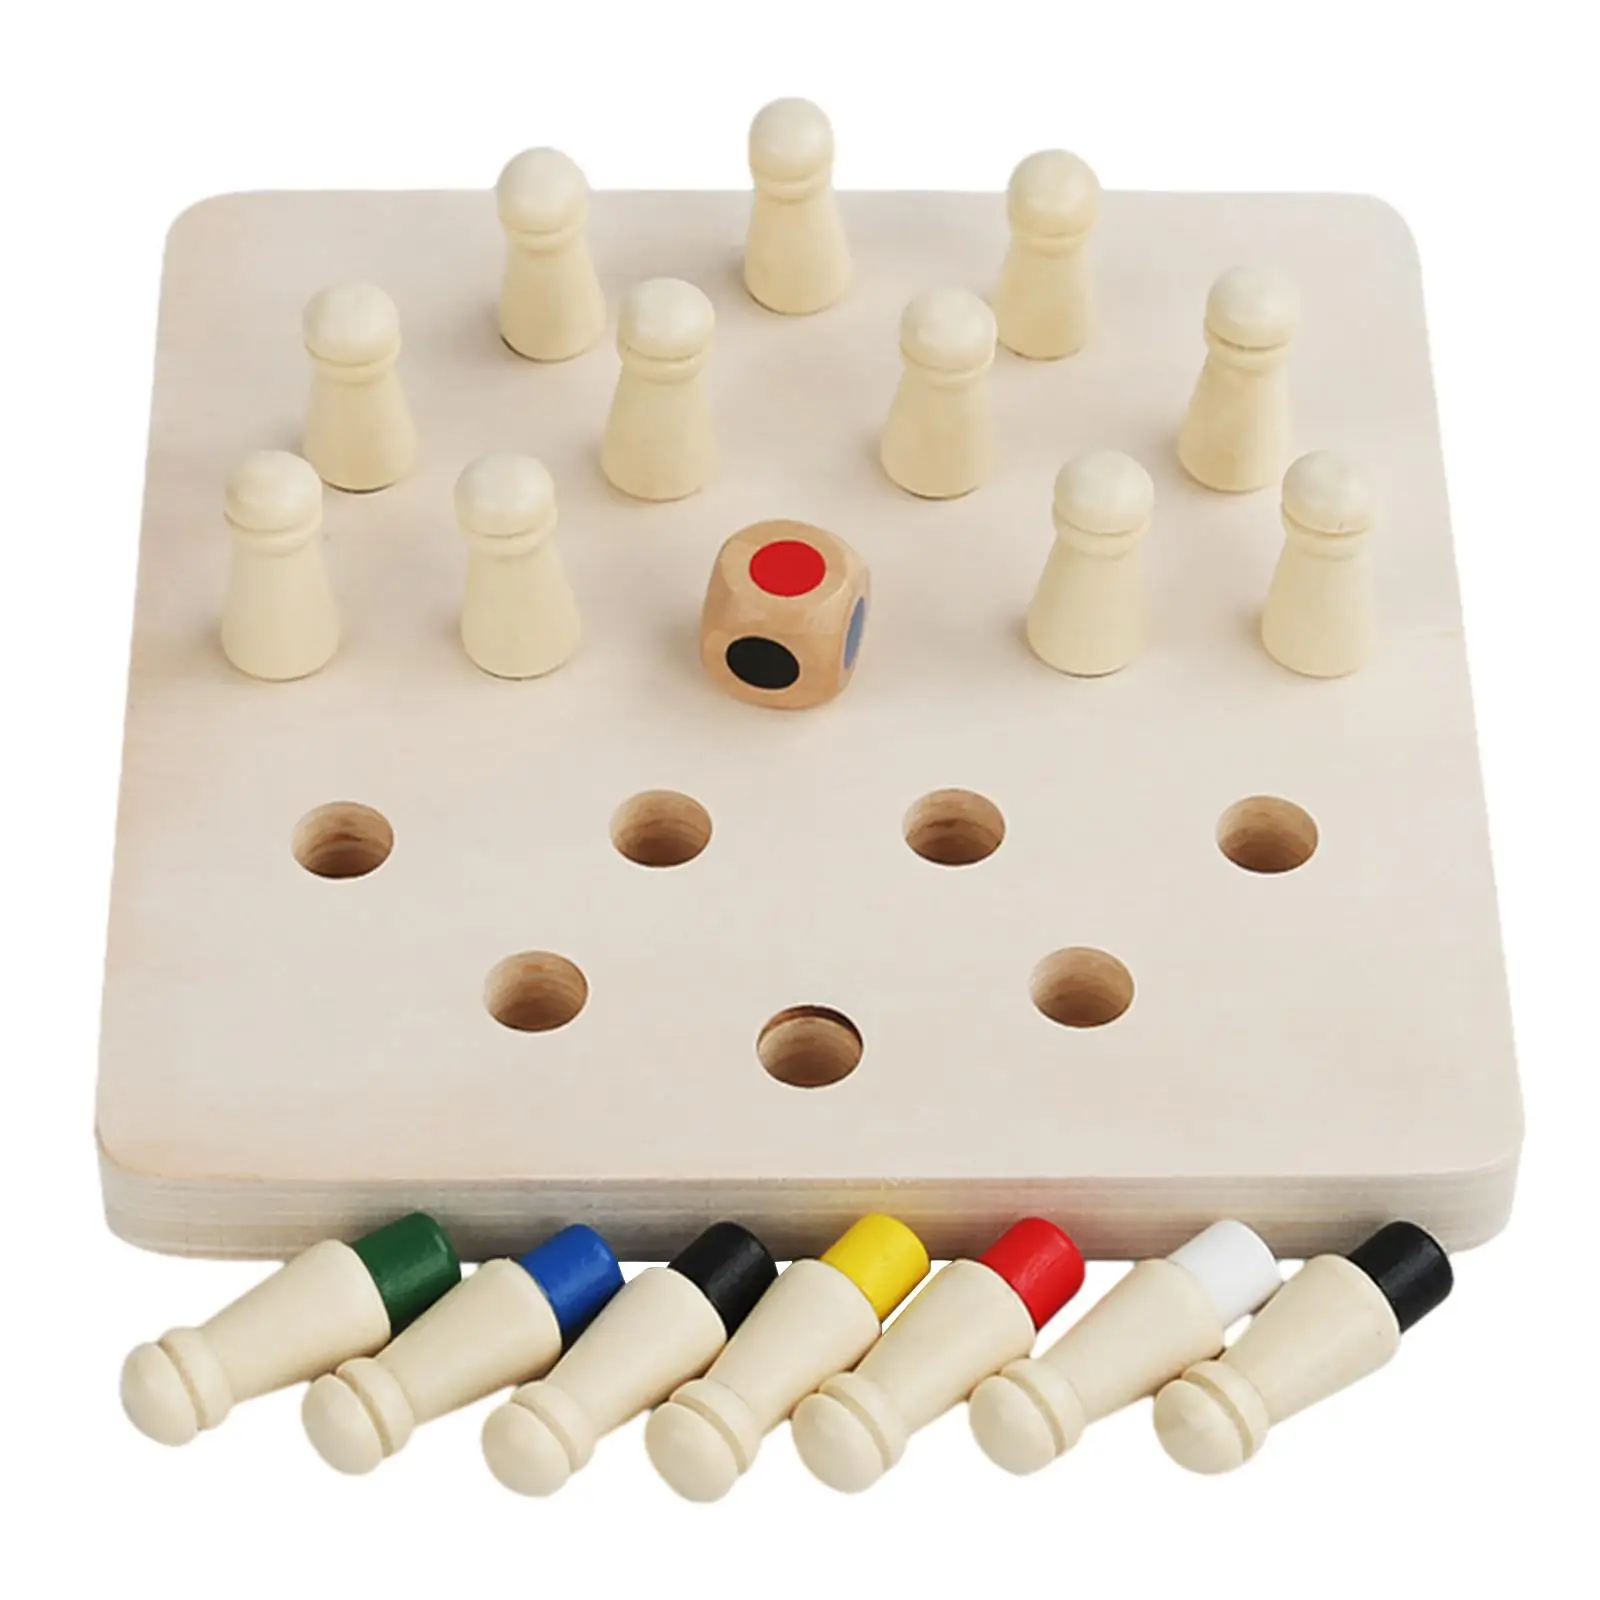 Memory Chess Toys Multi Player Early Education Toys Color Memory Matching Game for Boys Toddlers Kids Children Birthday Gifts